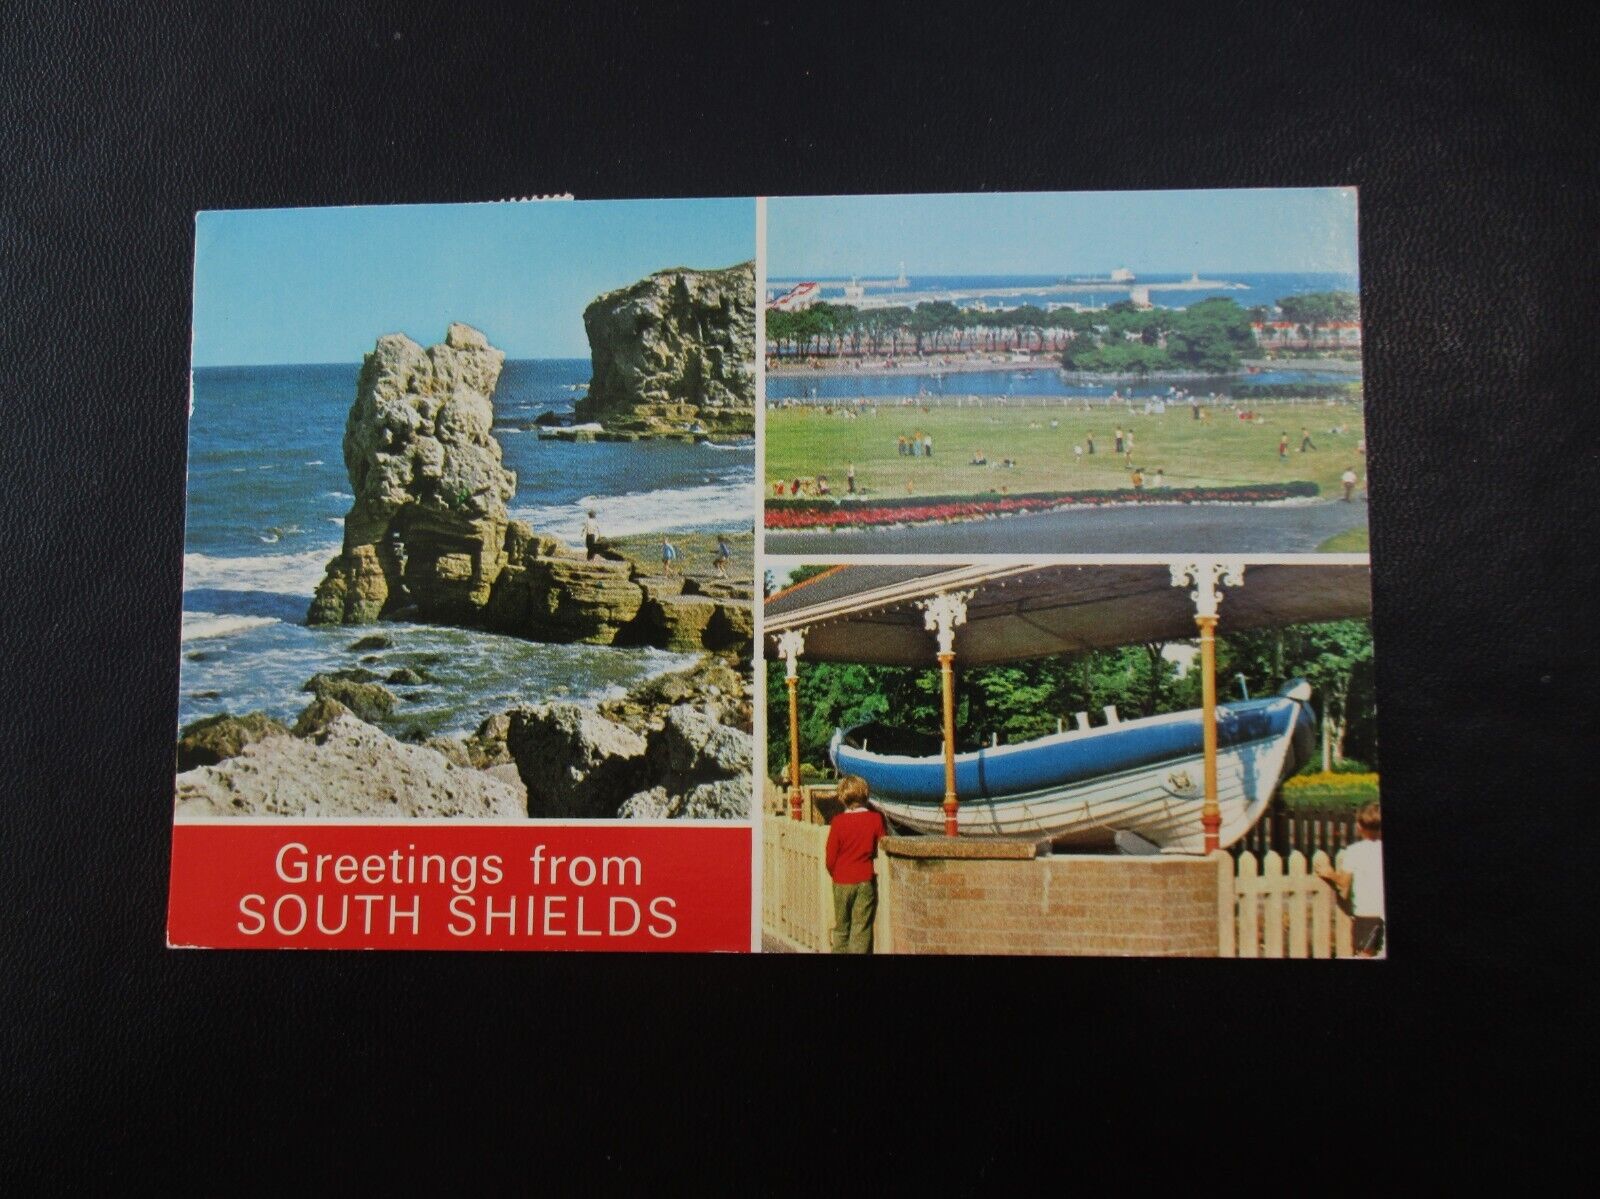 House Clearance - Multiview Card - SOUTH SHIELDS - Marine Park, Lifeboat Tyne - Shire Horse Stamp